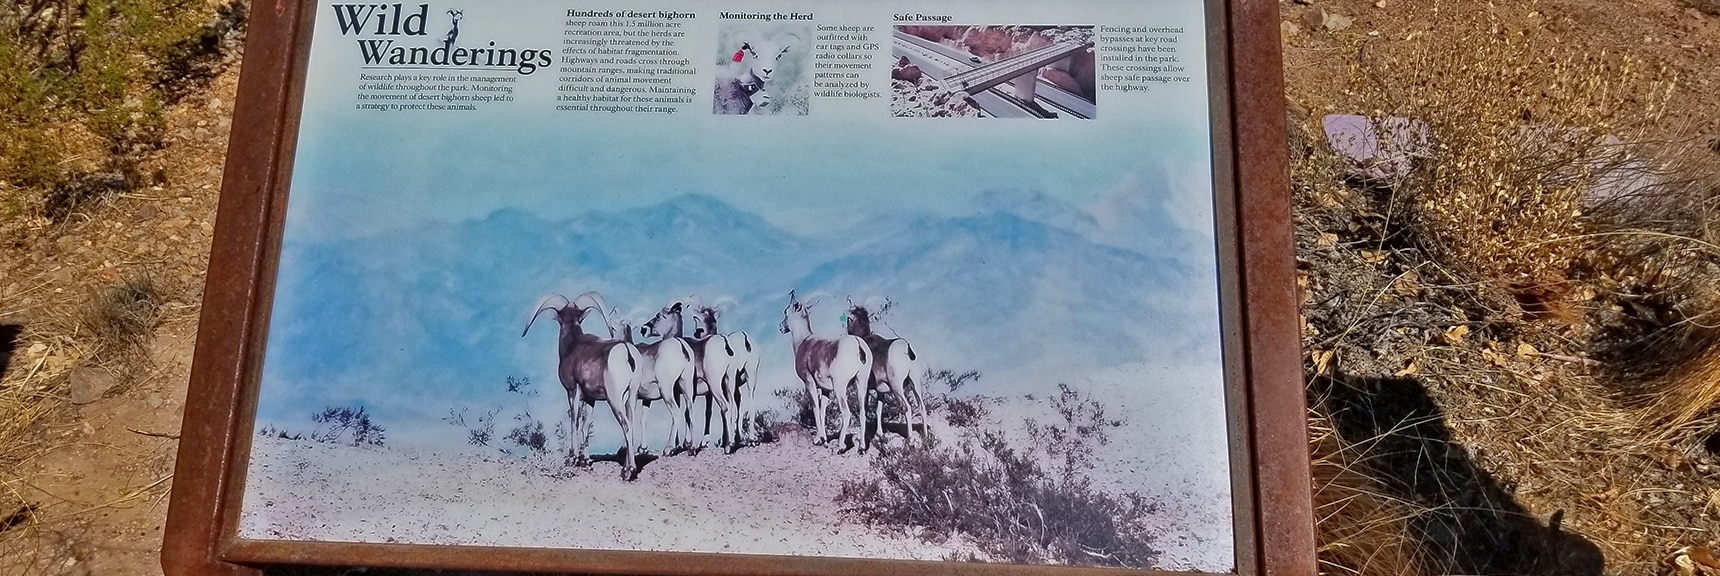 Interpretive Display of Animal Life in the Callville Bay Area | Callville Summit Trail | Lake Mead National Recreation Area, Nevada